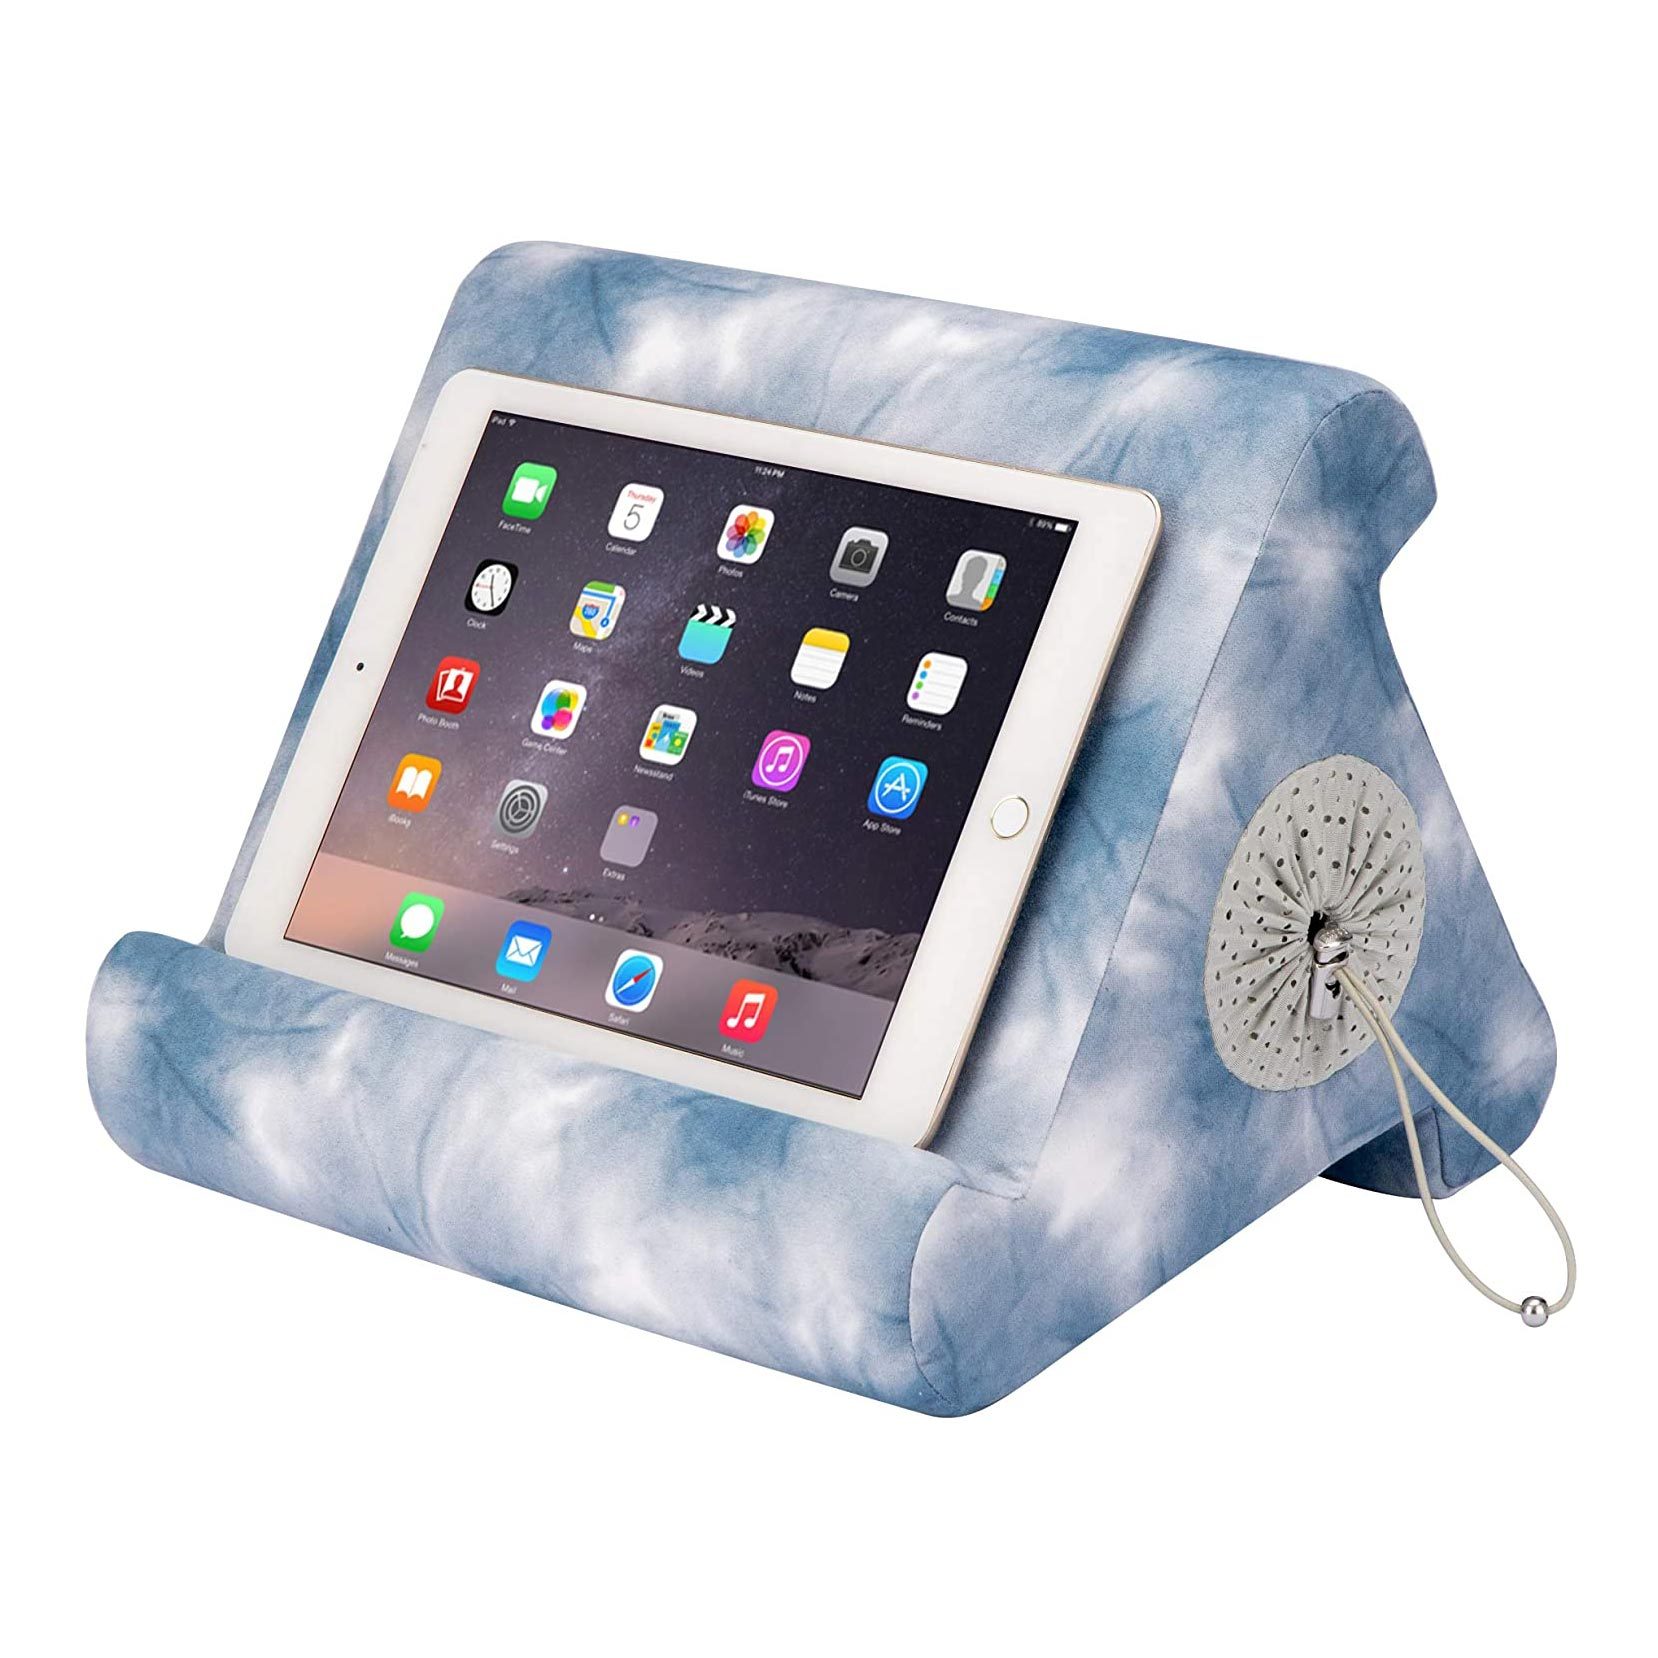 Flippy with Storage Cubby Multi-Angle Soft Pillow Lap Stand for iPads